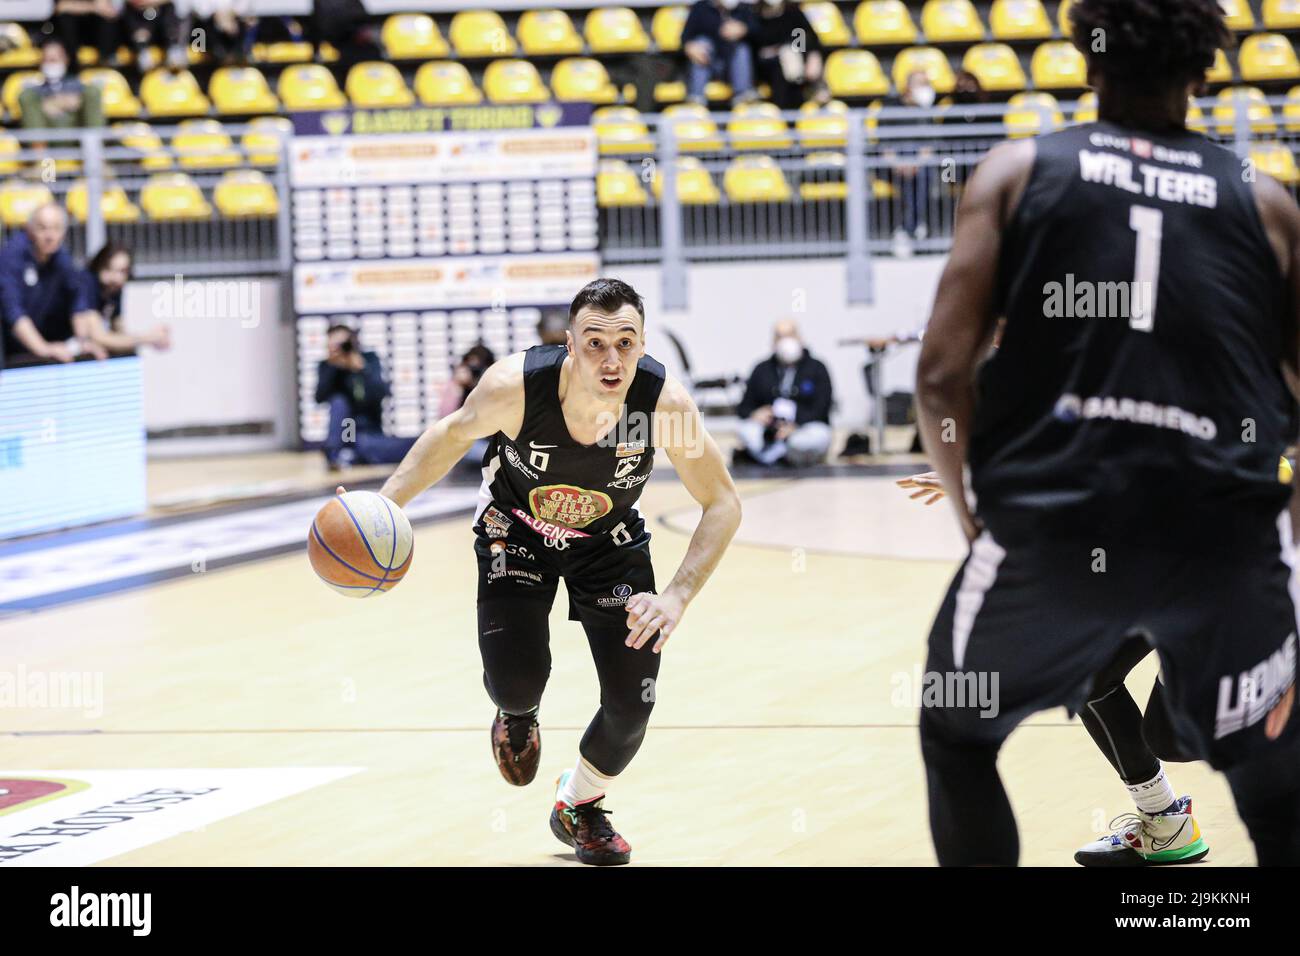 Alessandro Cappelletti (# 0 Udine) during Reale MutuaTorino Basket vs Apu Old Wild West Udine championschip Basket Serie A2 2021-2022 LBA Stock Photo